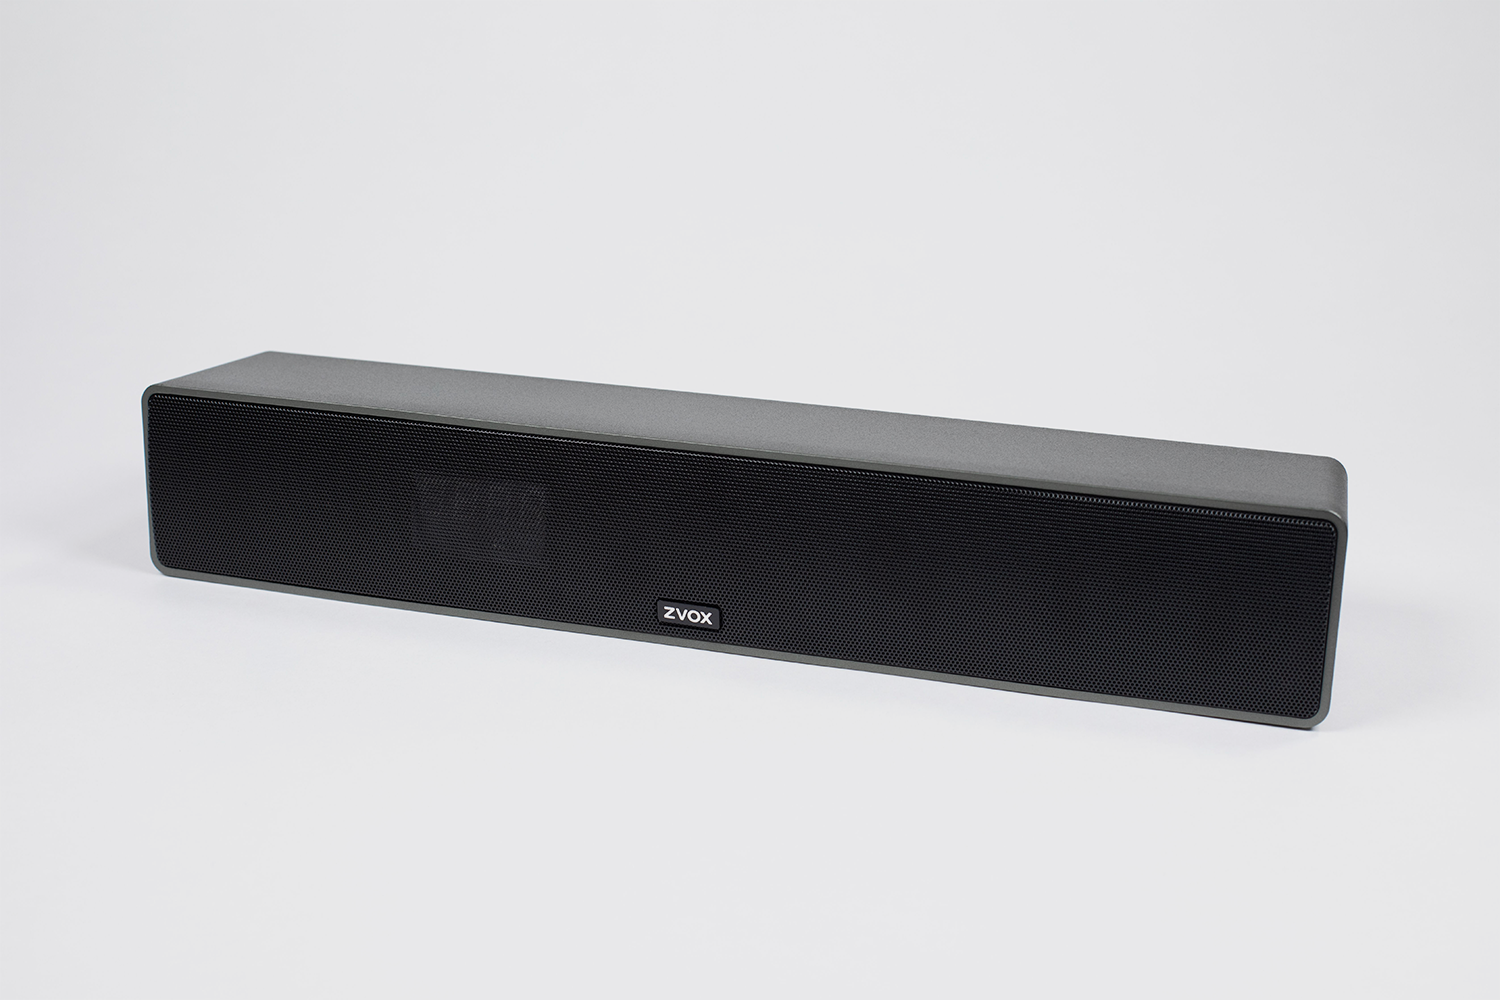 Deal: Save Over $200 on This Dialogue-Boosting Zvox TV Speaker